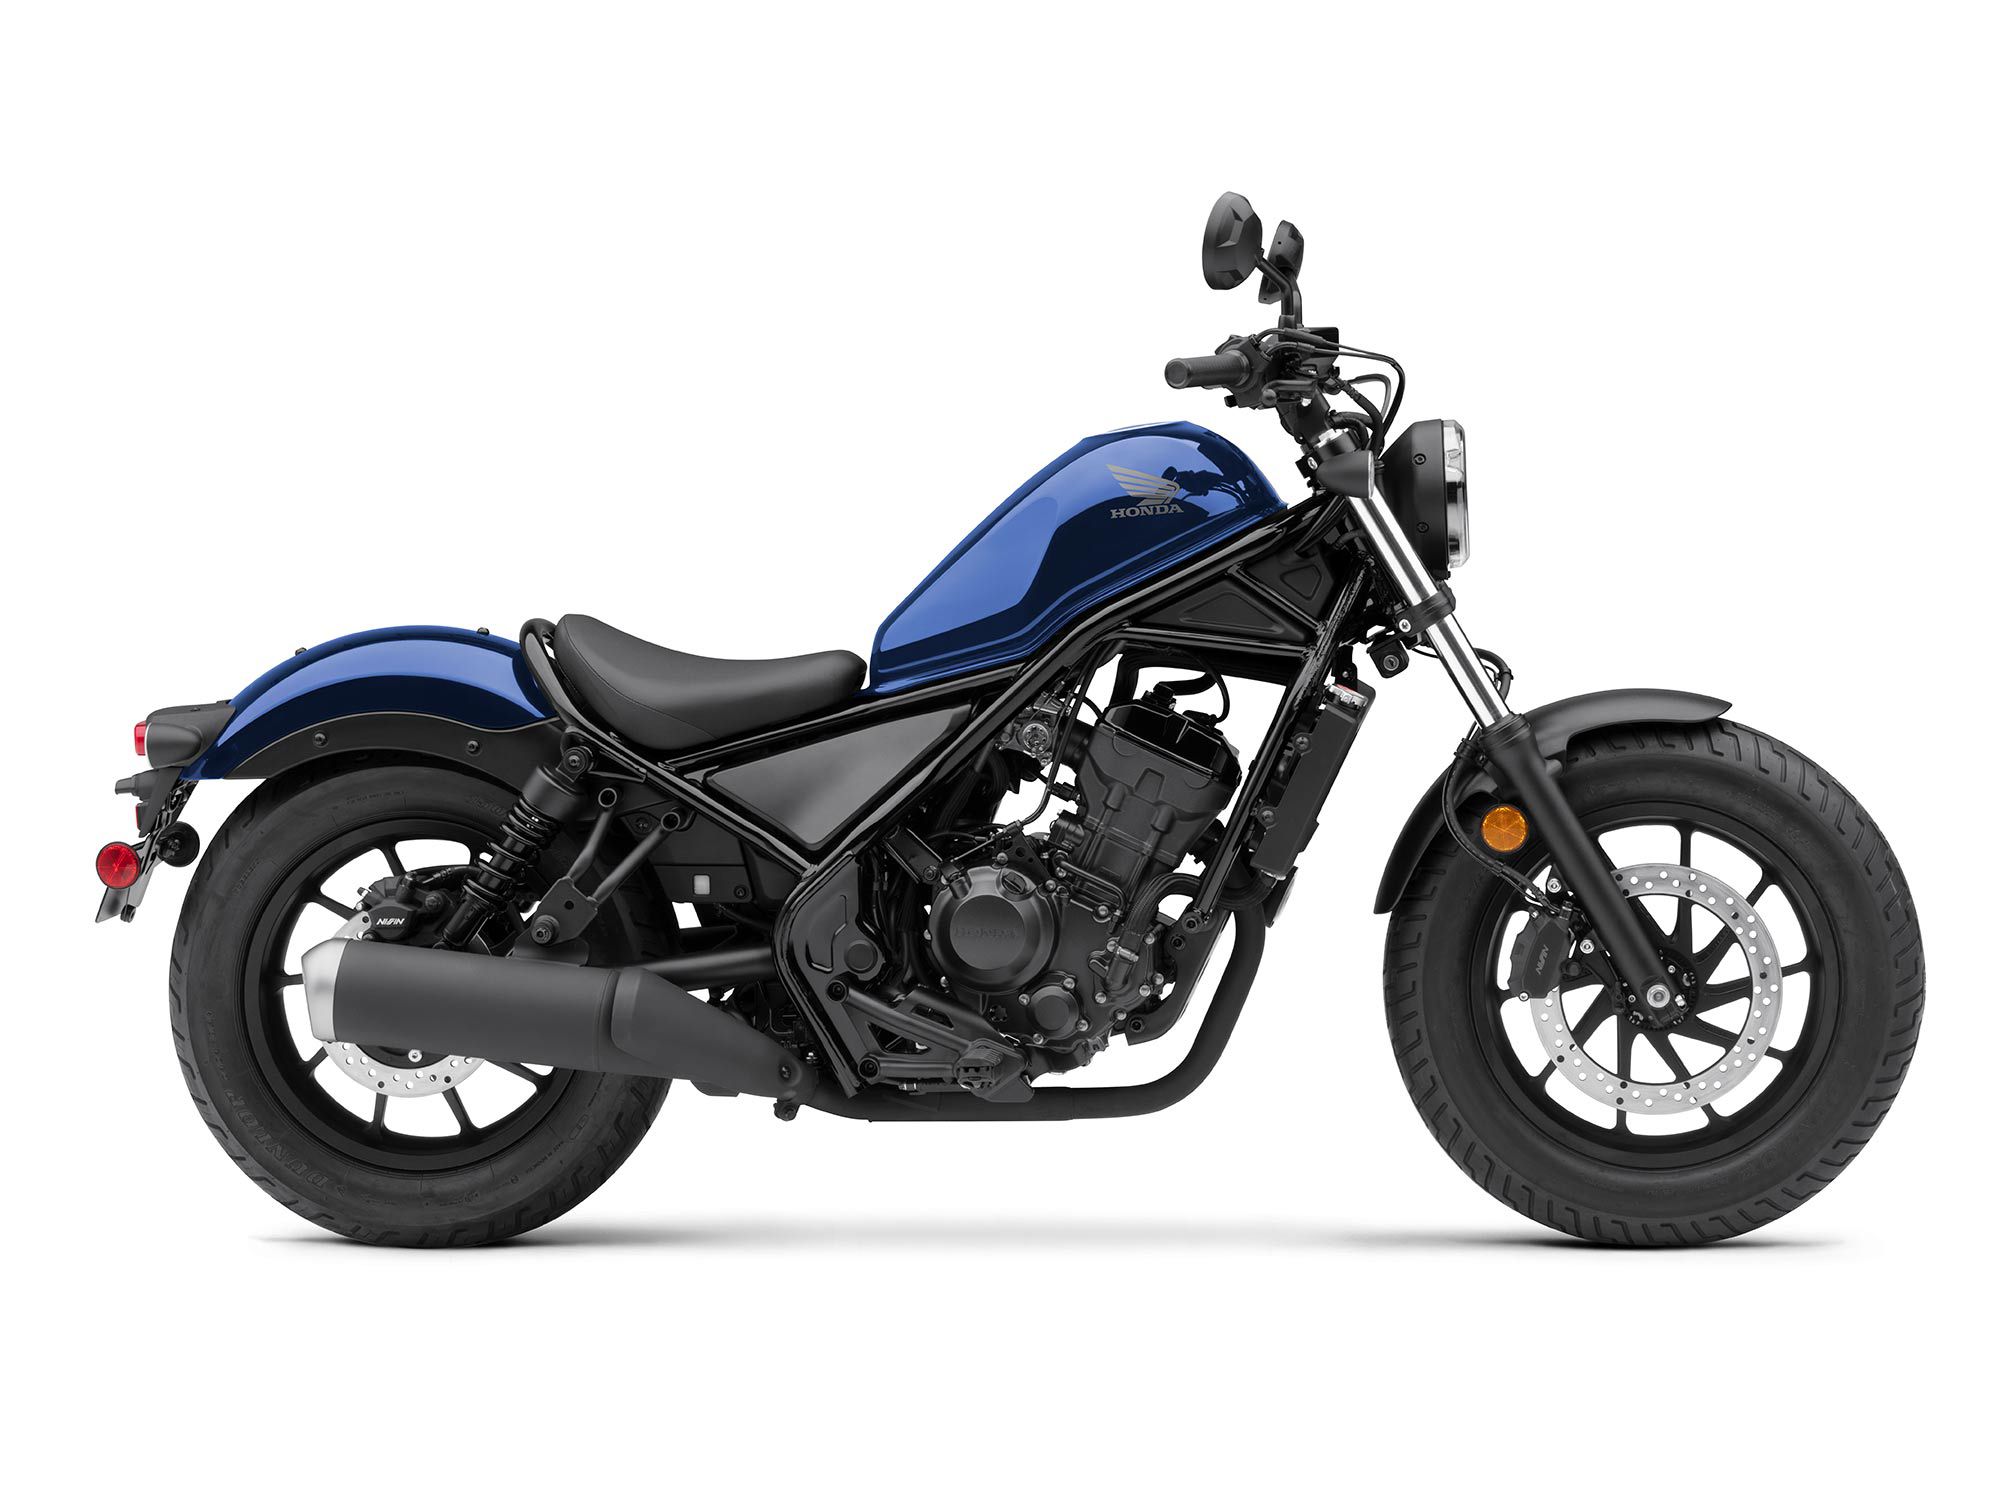 The Honda Rebel 300 is easygoing and totally approachable for new riders.